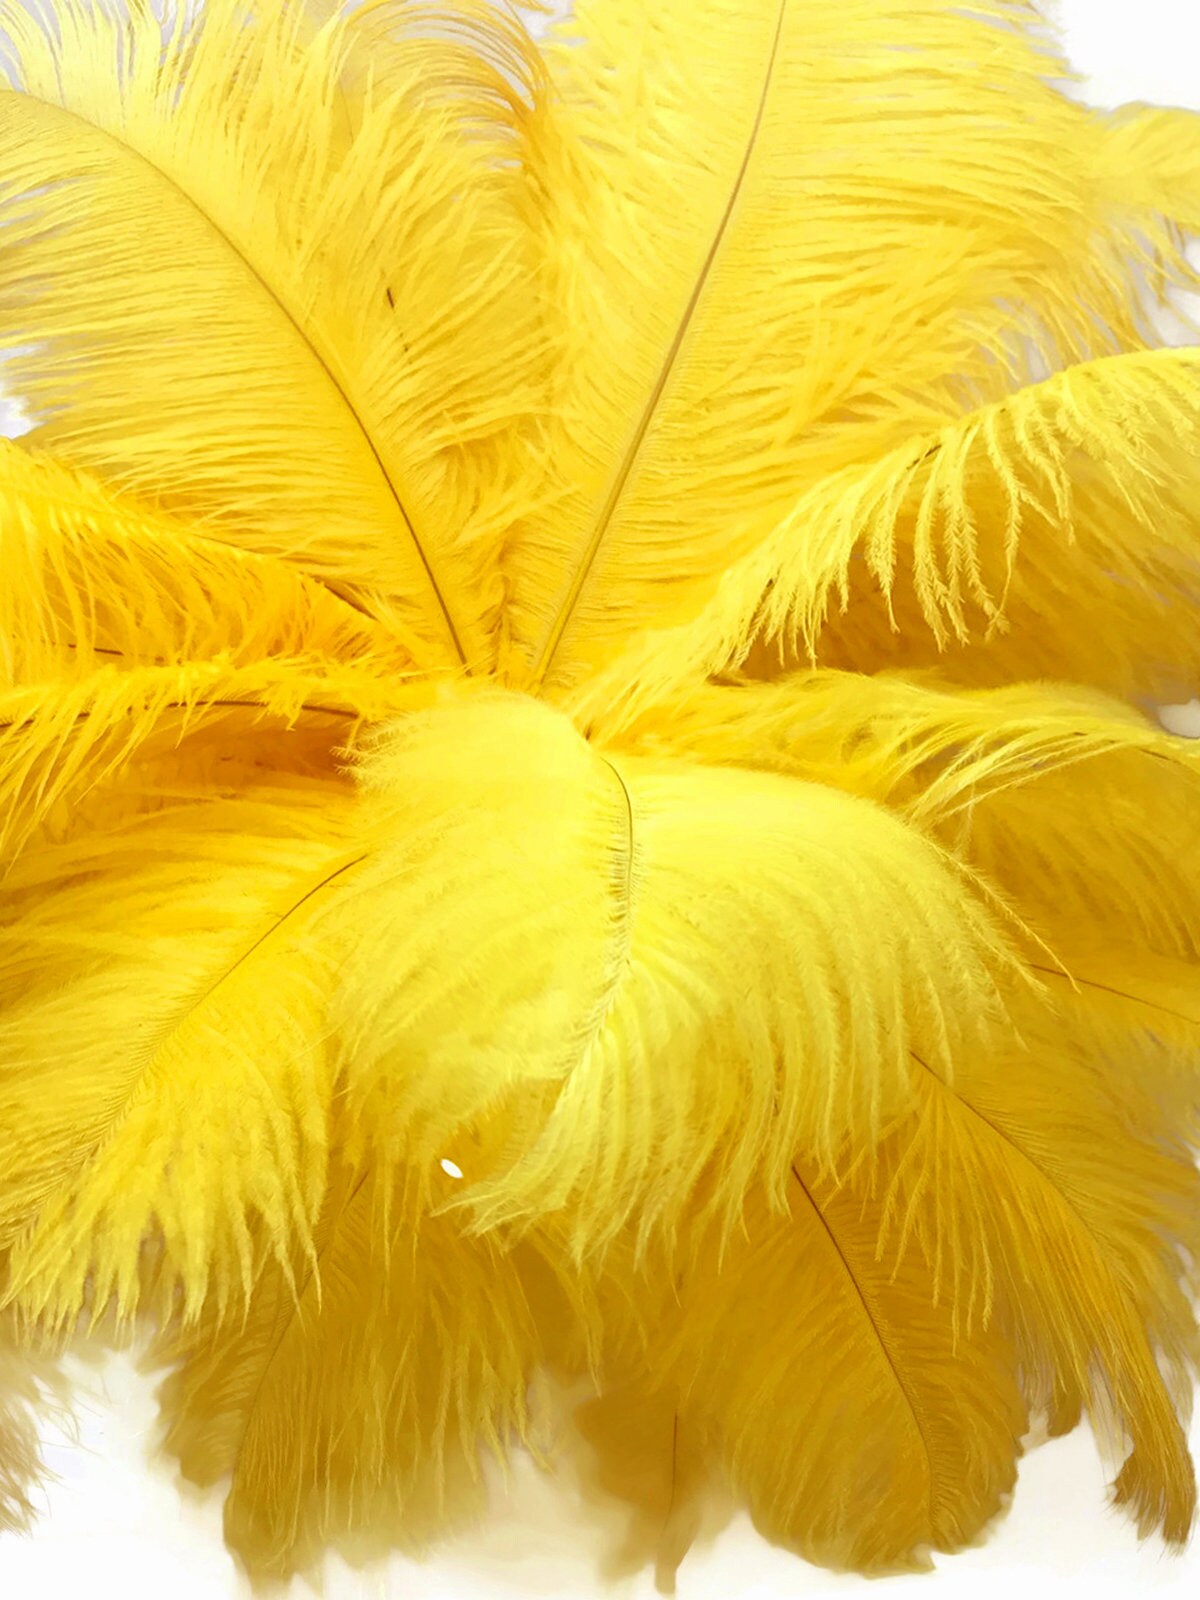 Ostrich Feathers, 10 Pieces - 8-10 Yellow Ostrich Dyed Drabs Body Feathers  Centerpiece Craft Supplier : 4000